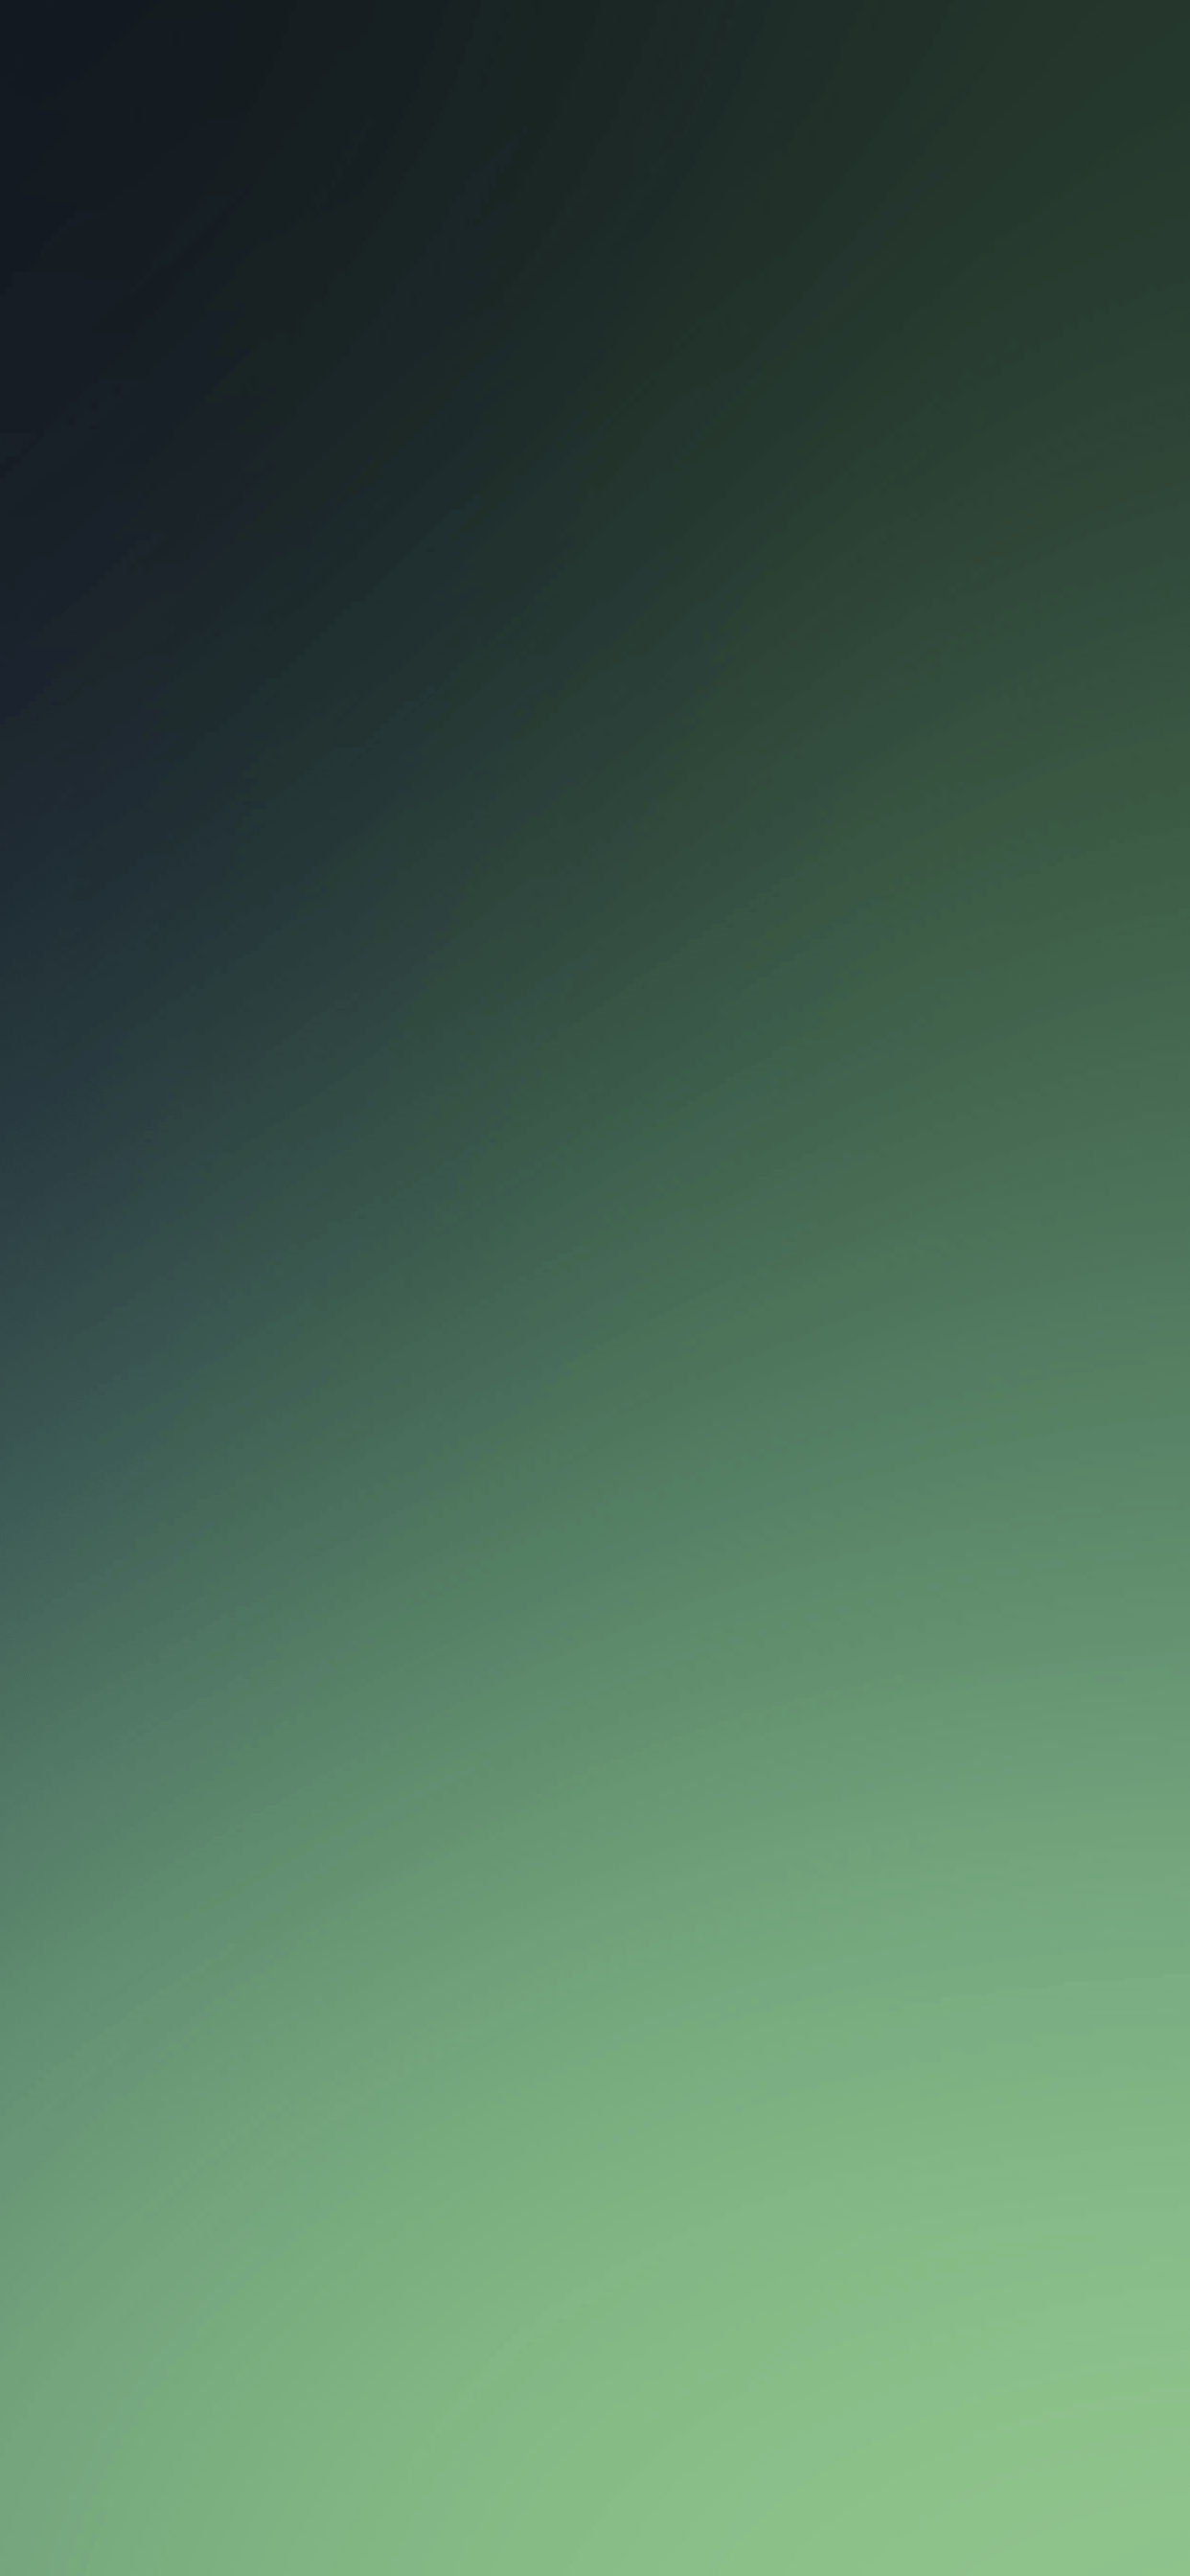 Green Inspired Wallpaper For IPad And IPhone XS Max